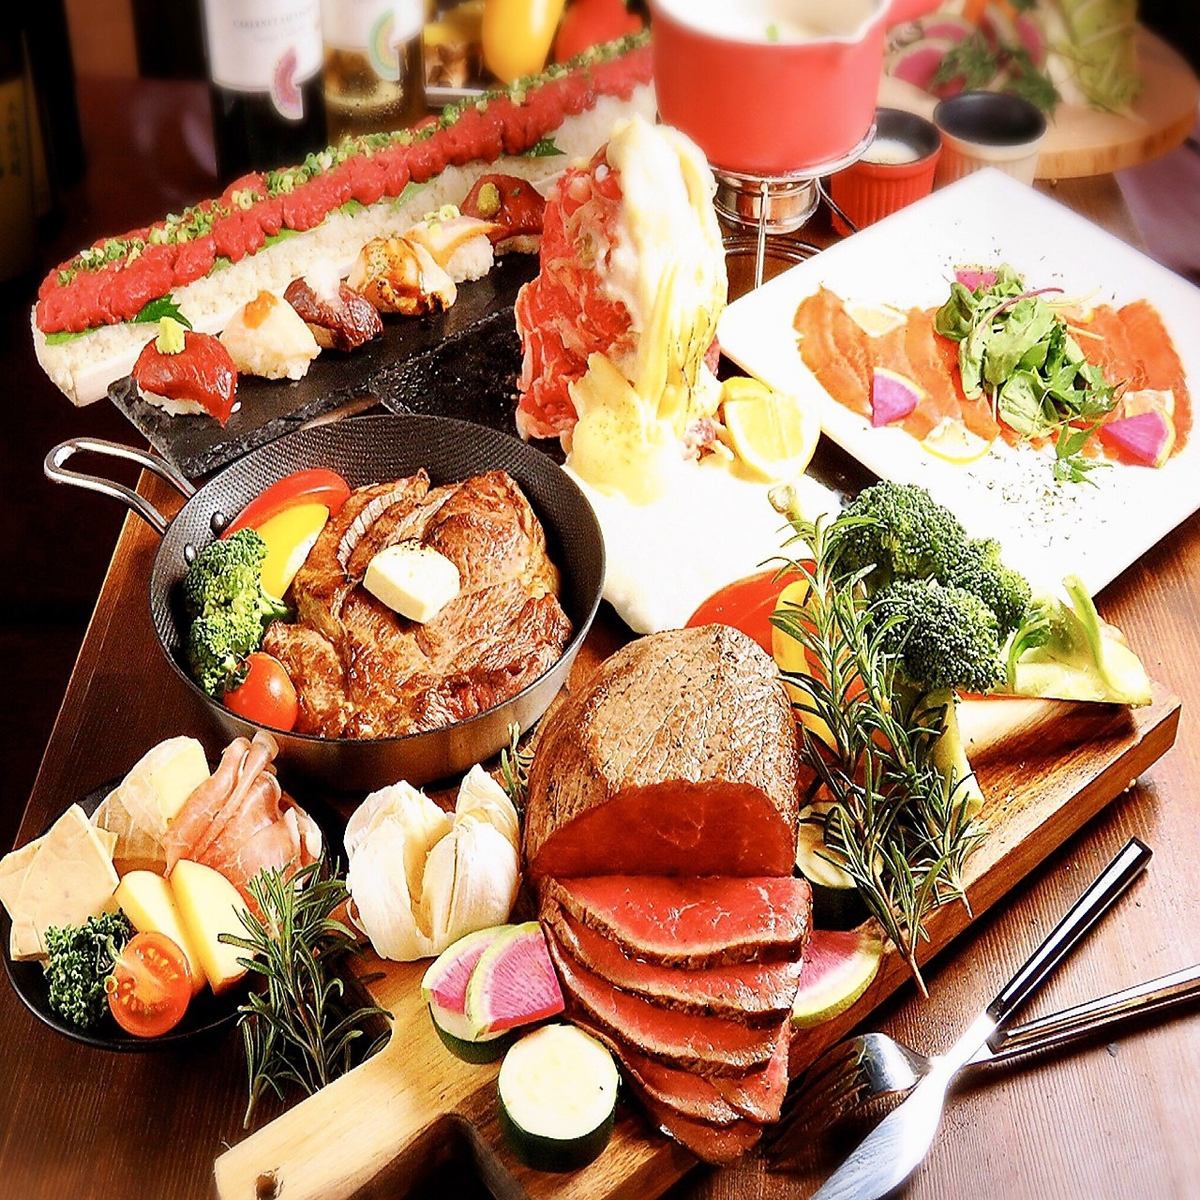 ≪Tankaku Beef≫ Meat bar MENU using beef and cheese created by the chef♪